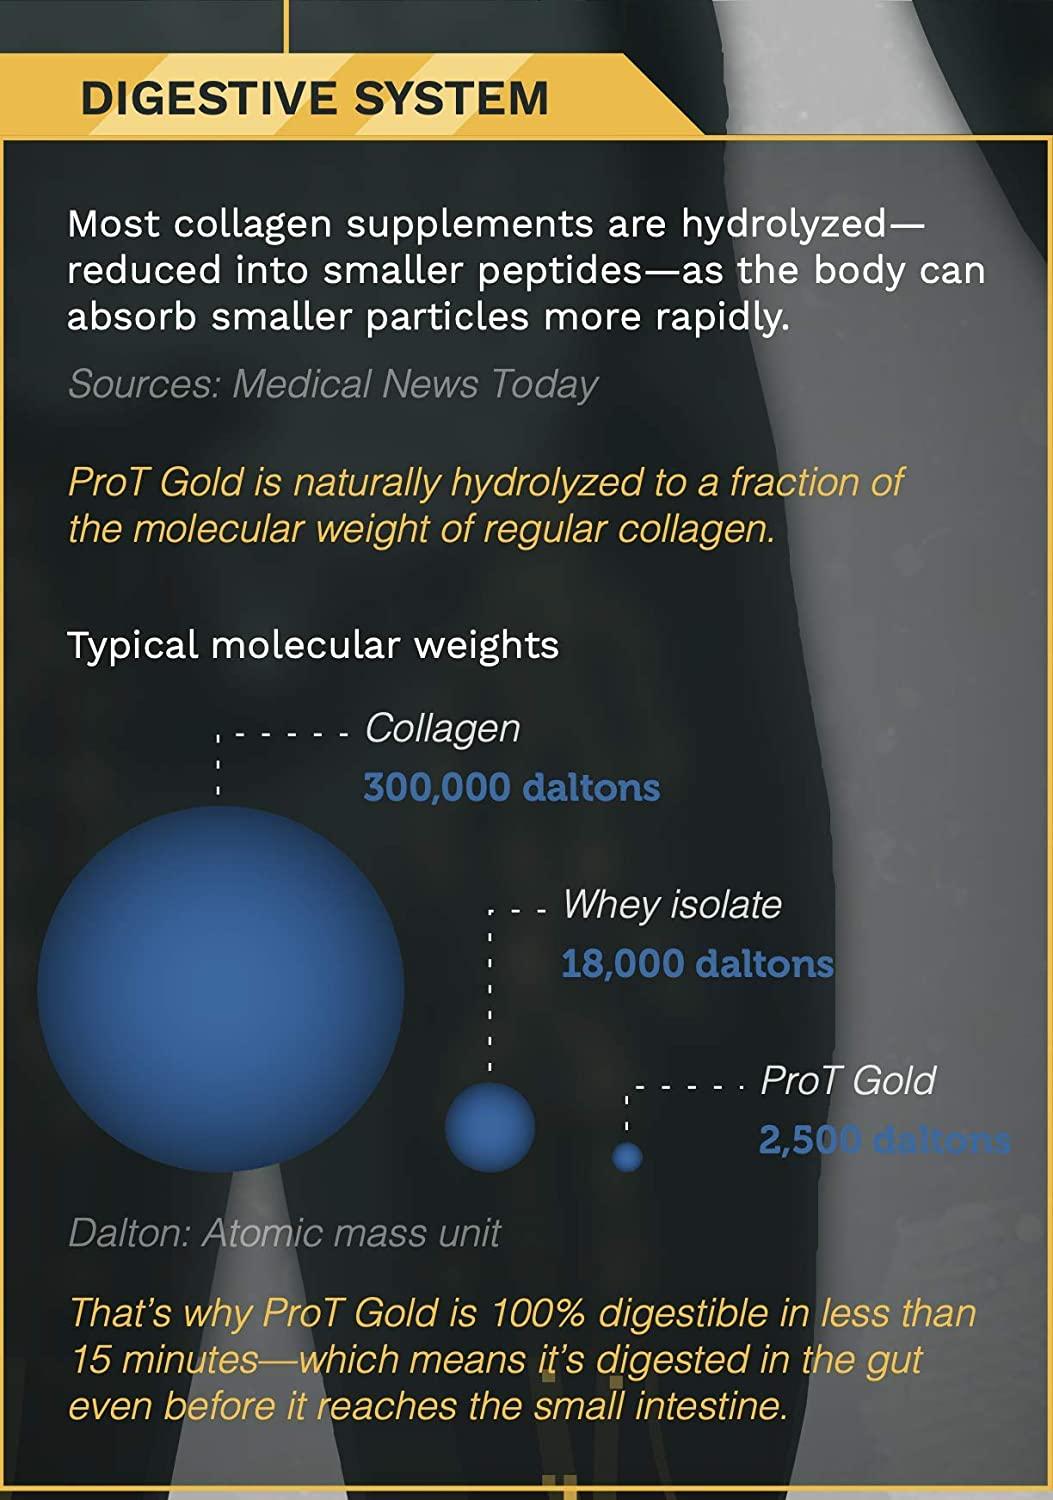 ProT GOLD Collagen Liquid Protein Shots | Berry Sugar Free | 24 packets |  Ant